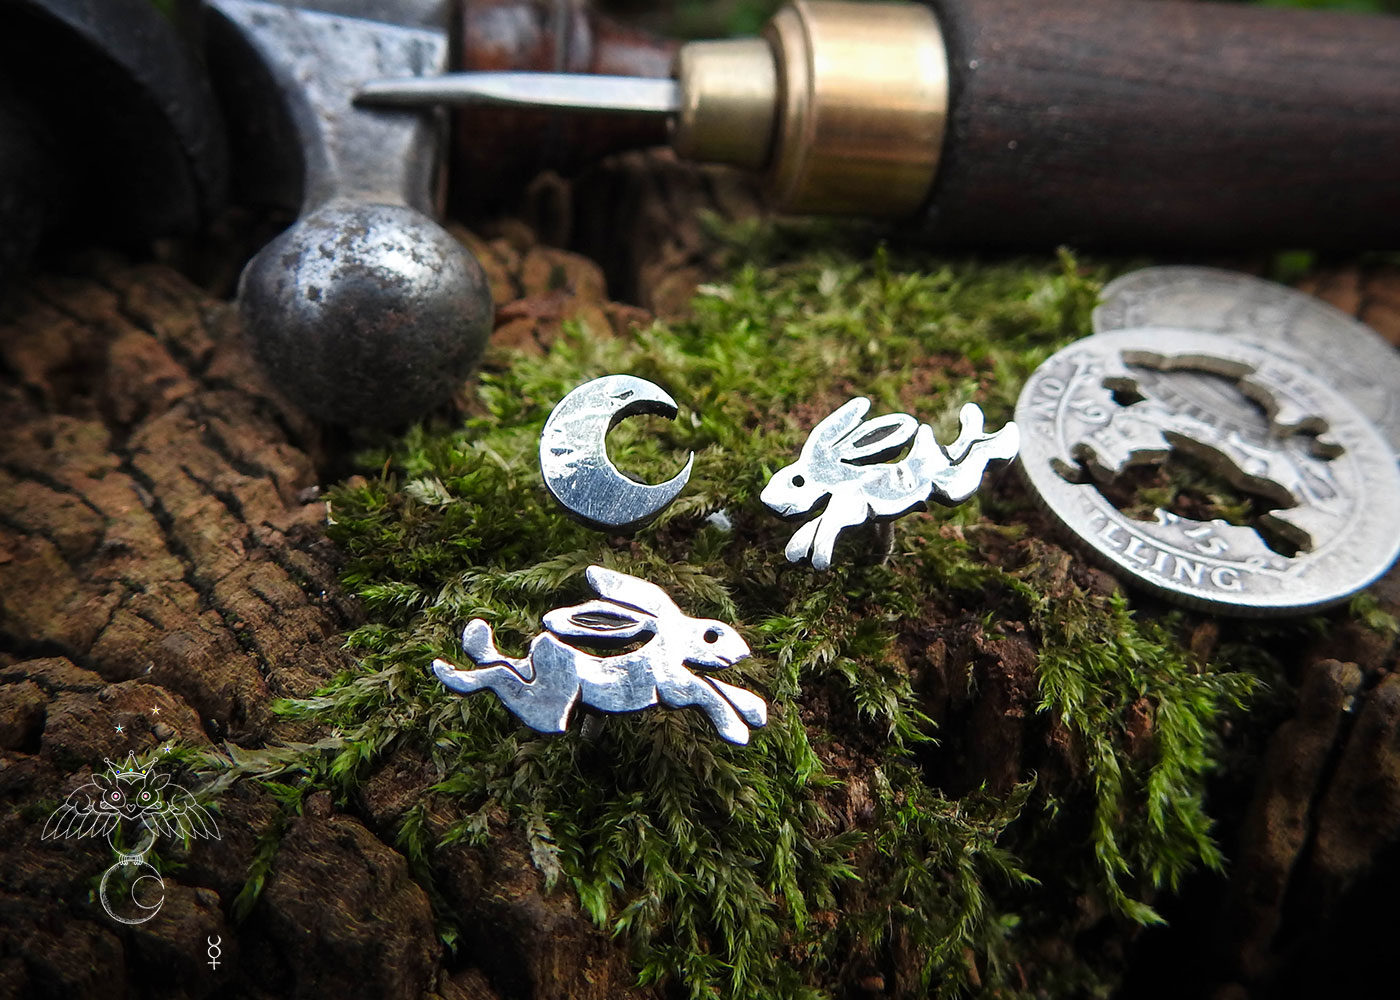 Magical hare earrings - handmade and recycled sterling silver shillings